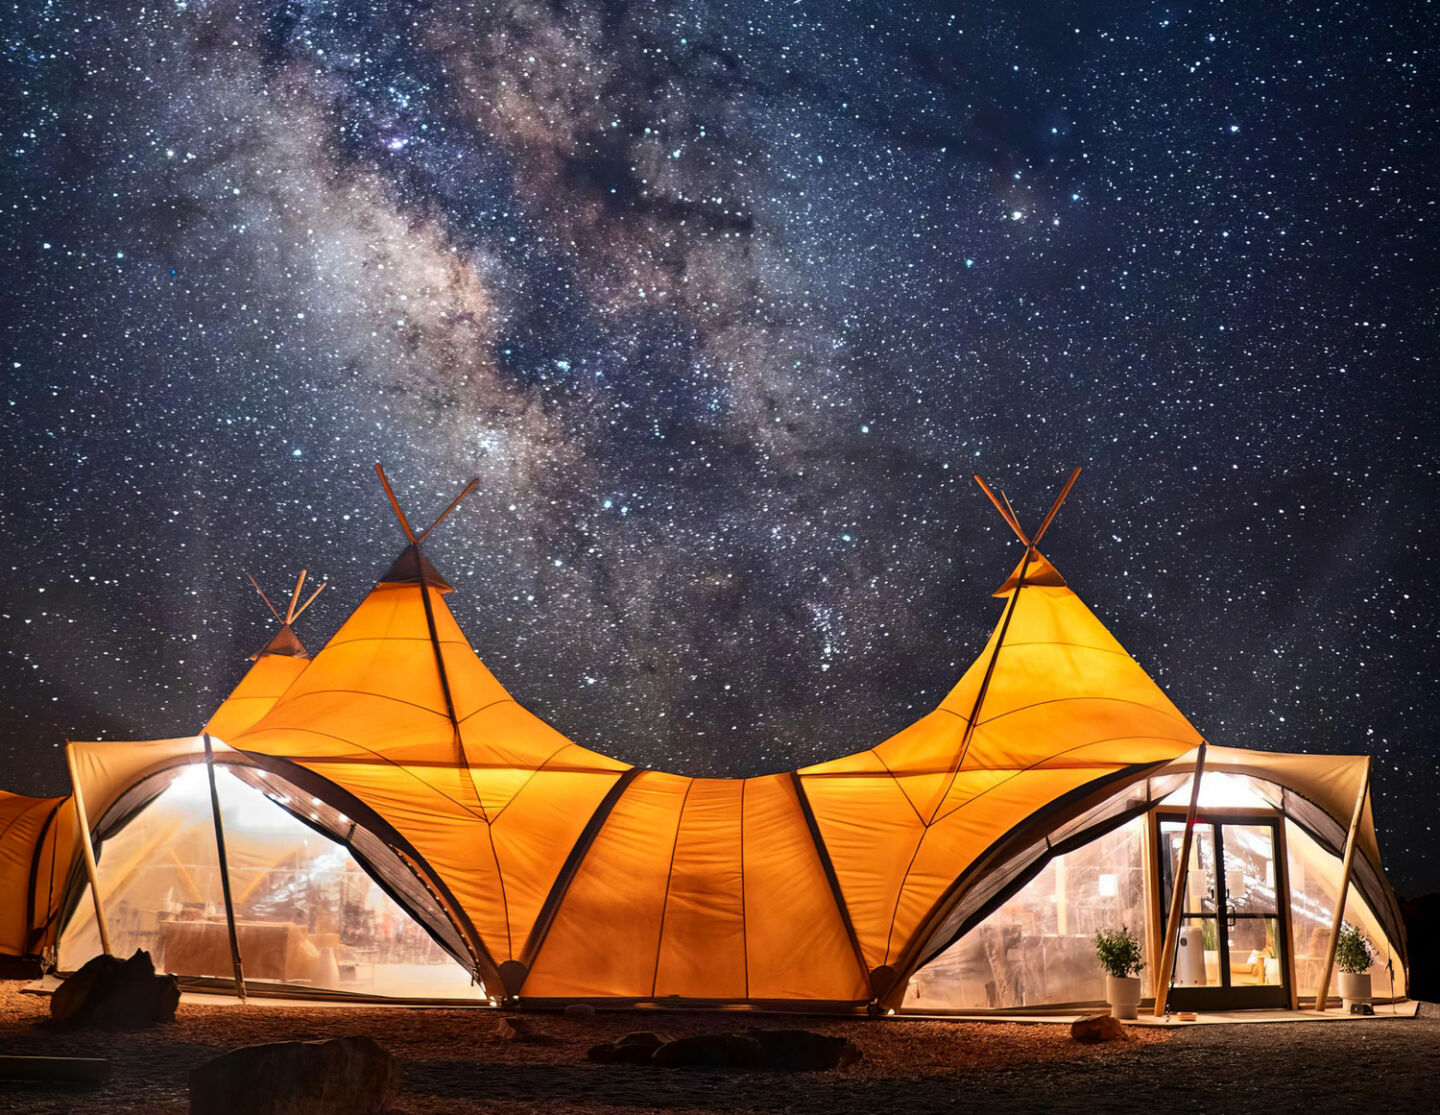 A tent cabin lit up at night, under a glorious Milky Way in the sky.